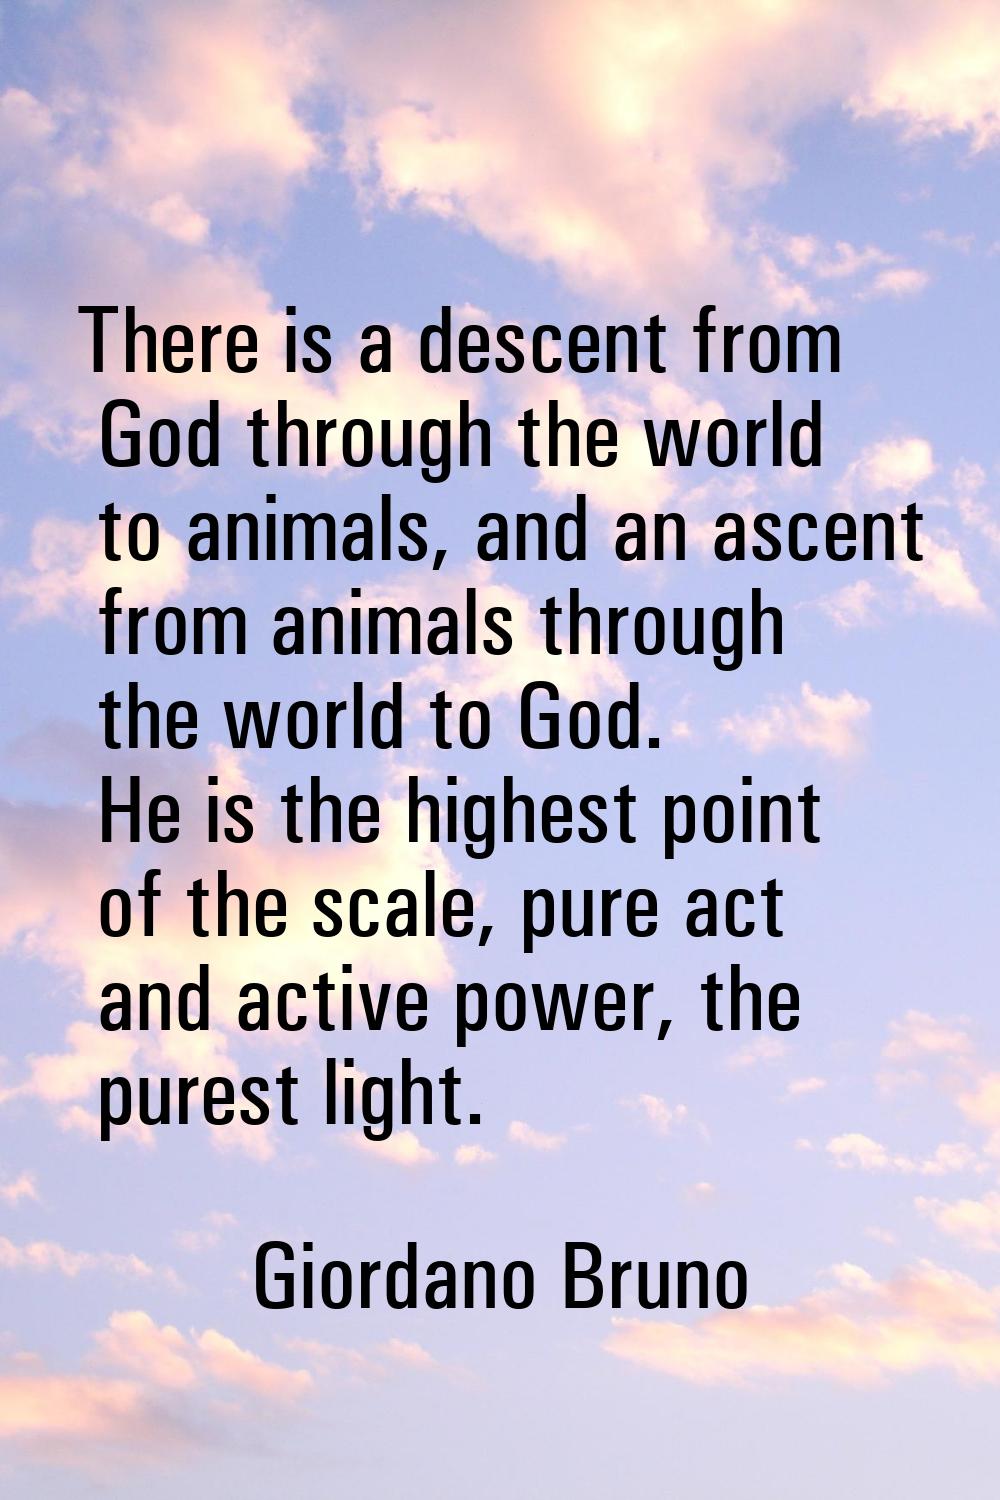 There is a descent from God through the world to animals, and an ascent from animals through the wo